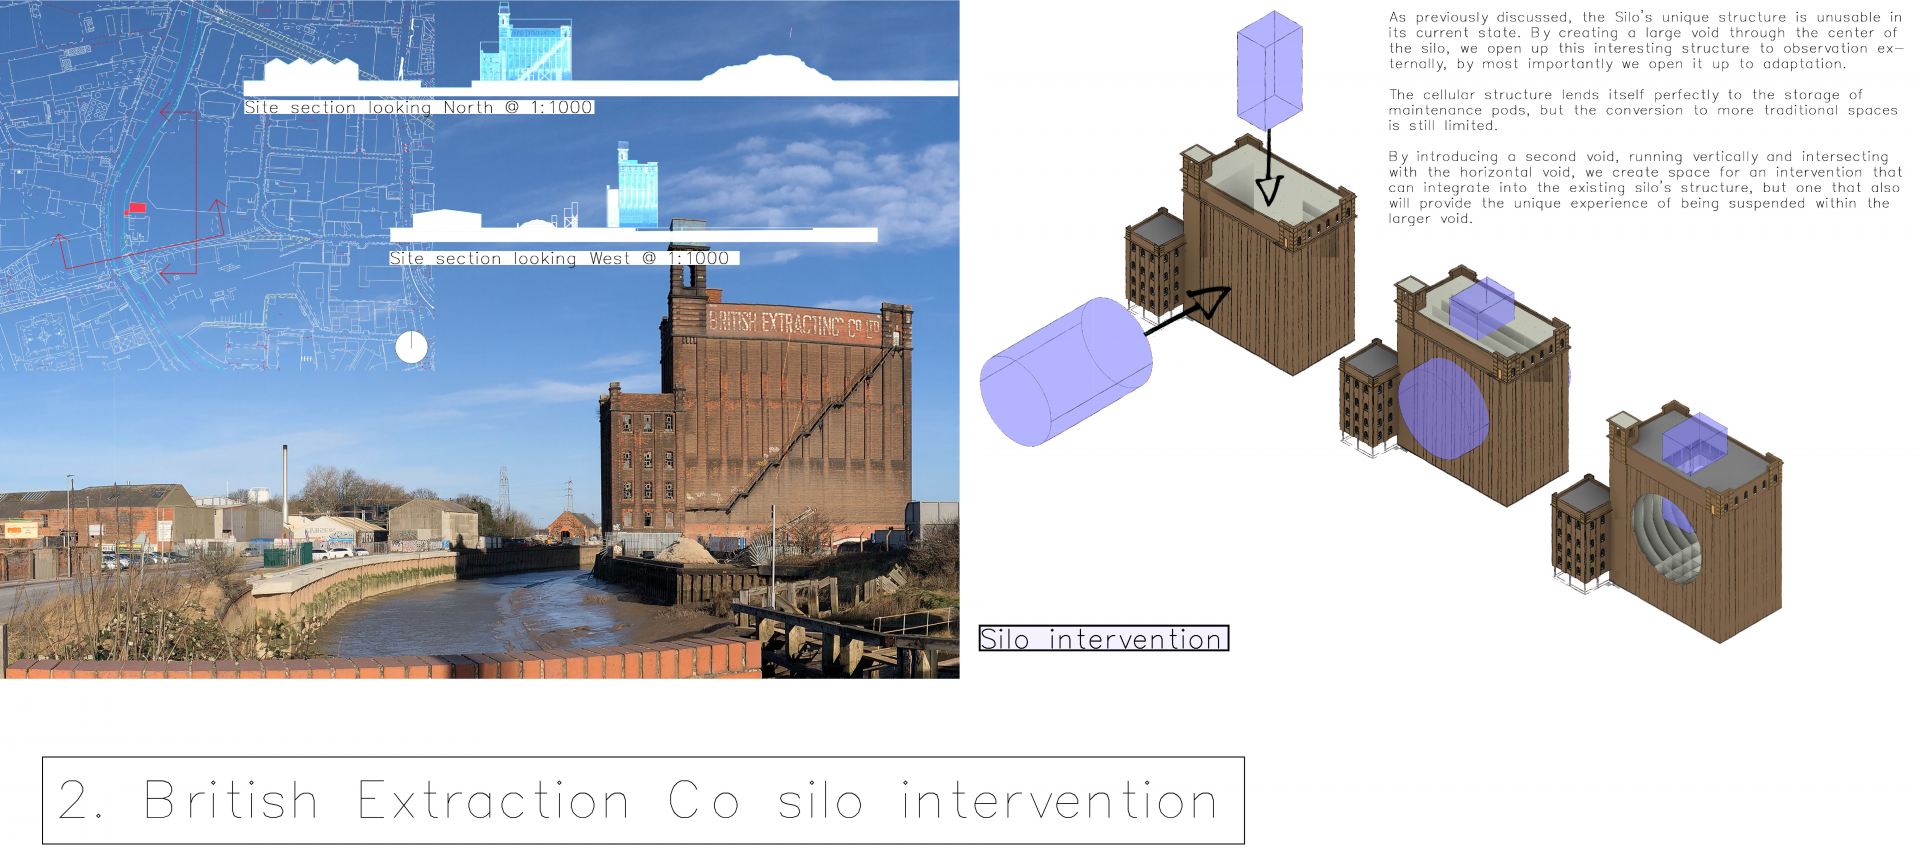 The silo has a unique honeycomb like structure internally. In order for it's use to be adapted, a drastic intervention is required; the insertion of two voids to create new usable spaces.